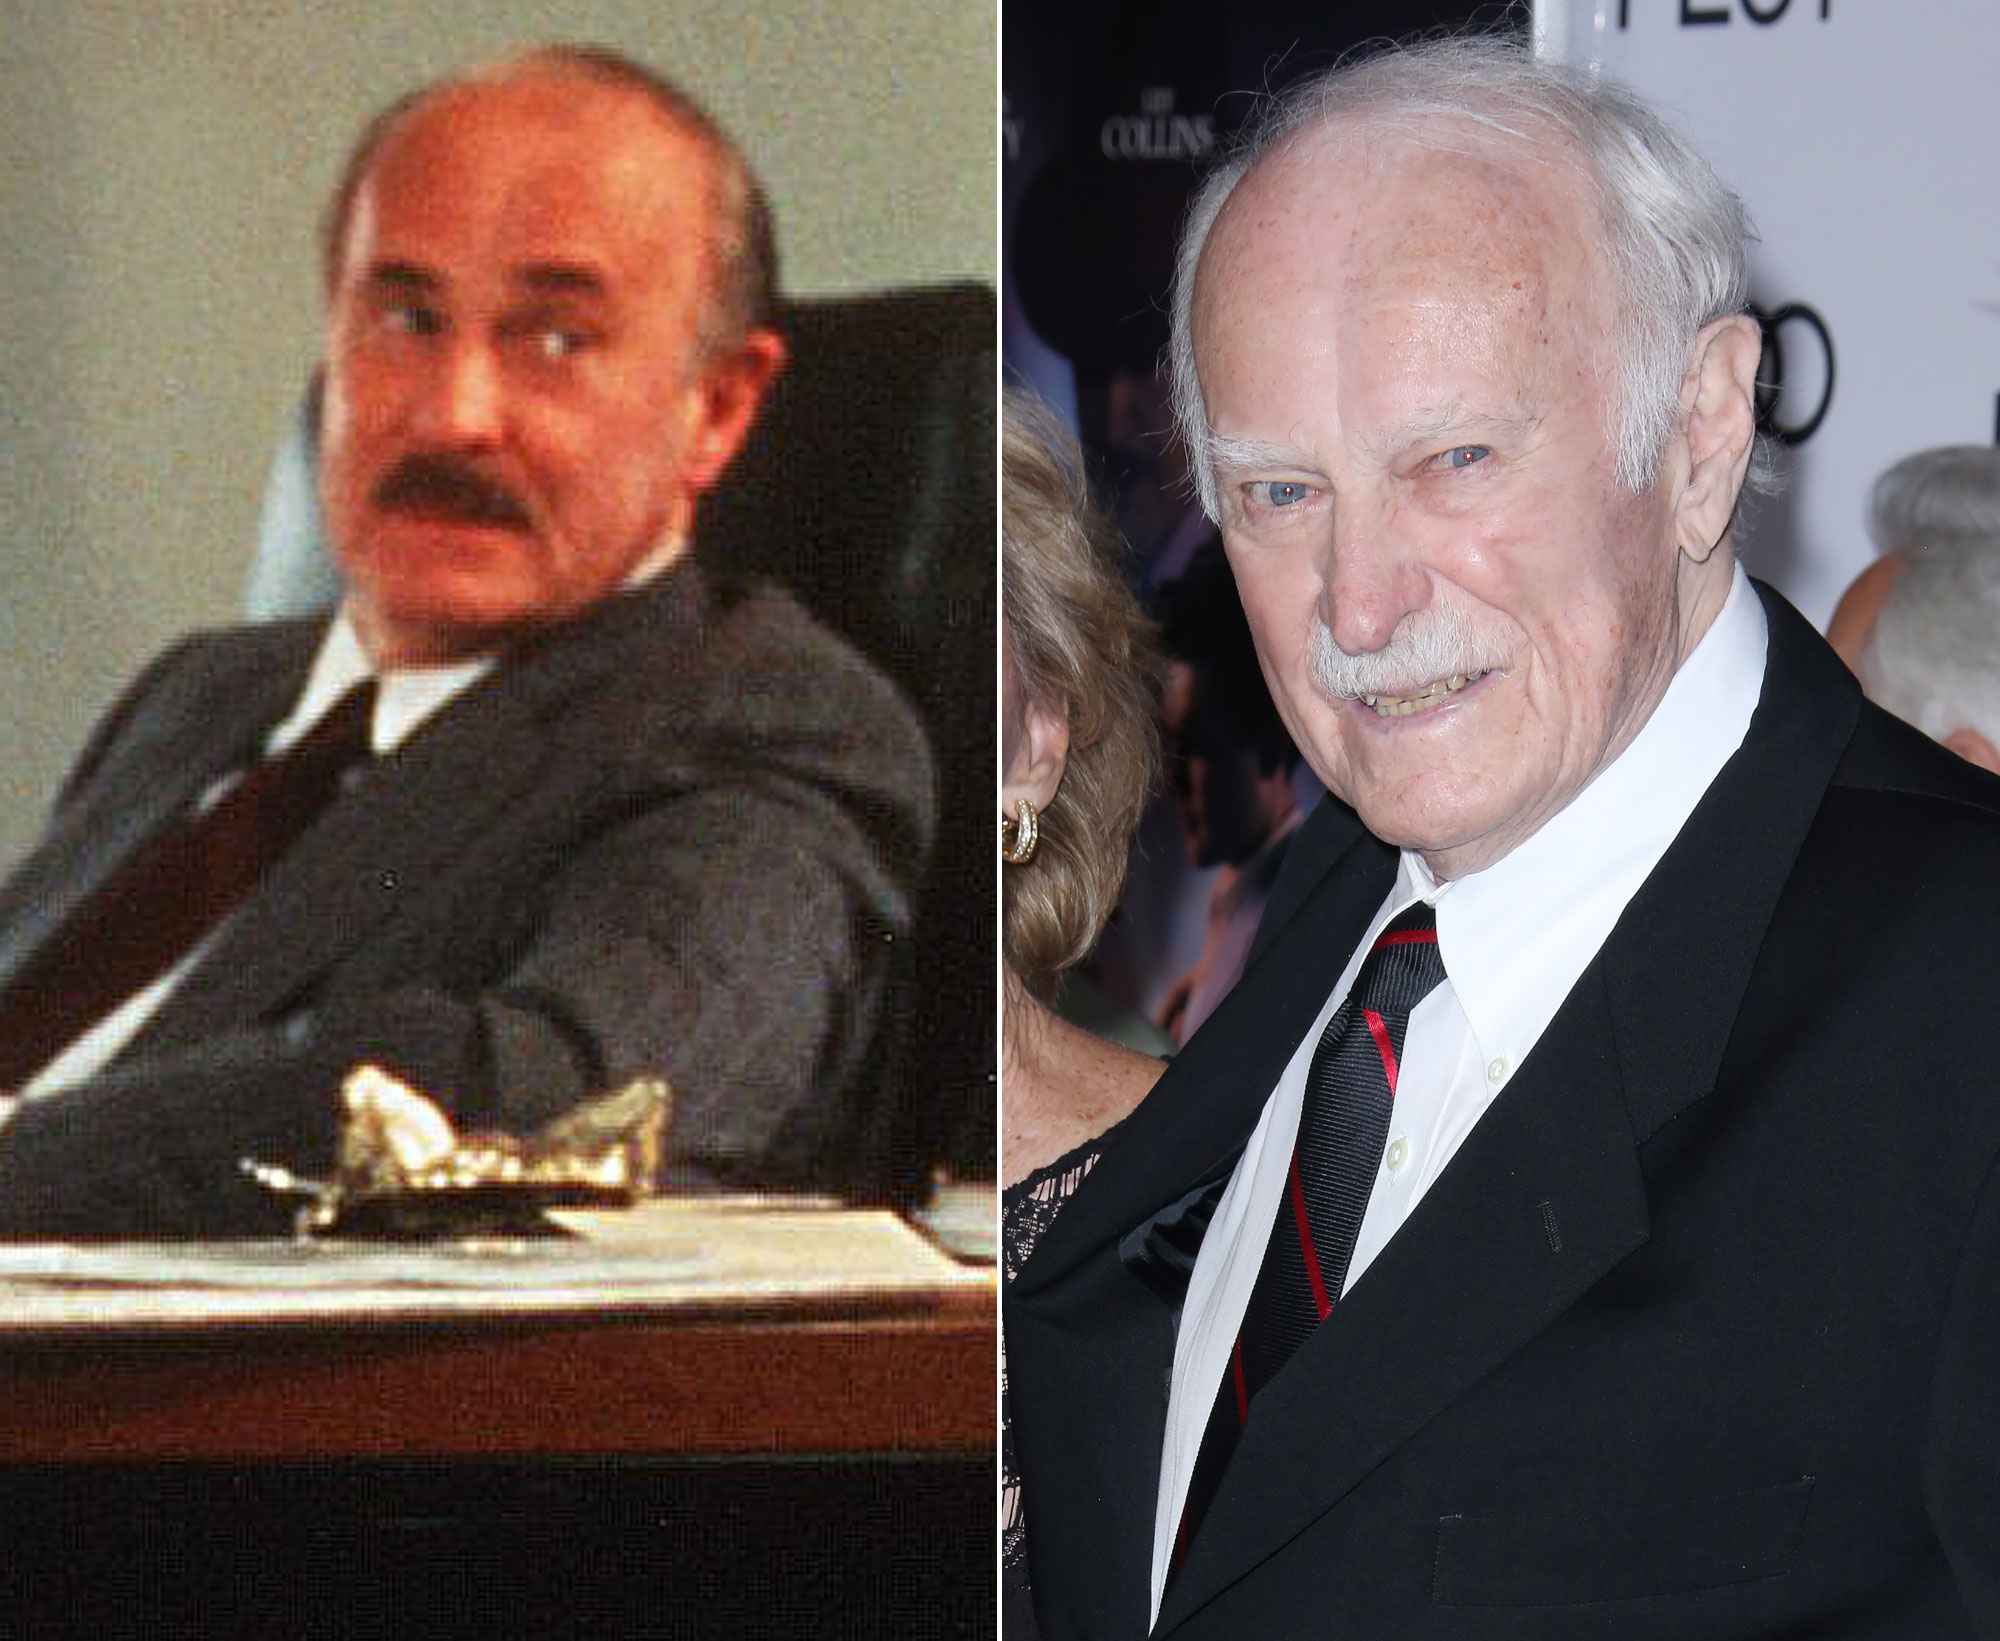 https://www.usmagazine.com/wp-content/uploads/2020/11/Youve-Got-Mail-Where-Are-They-Now-Dabney-Coleman-Slide.jpg?quality=82&strip=all